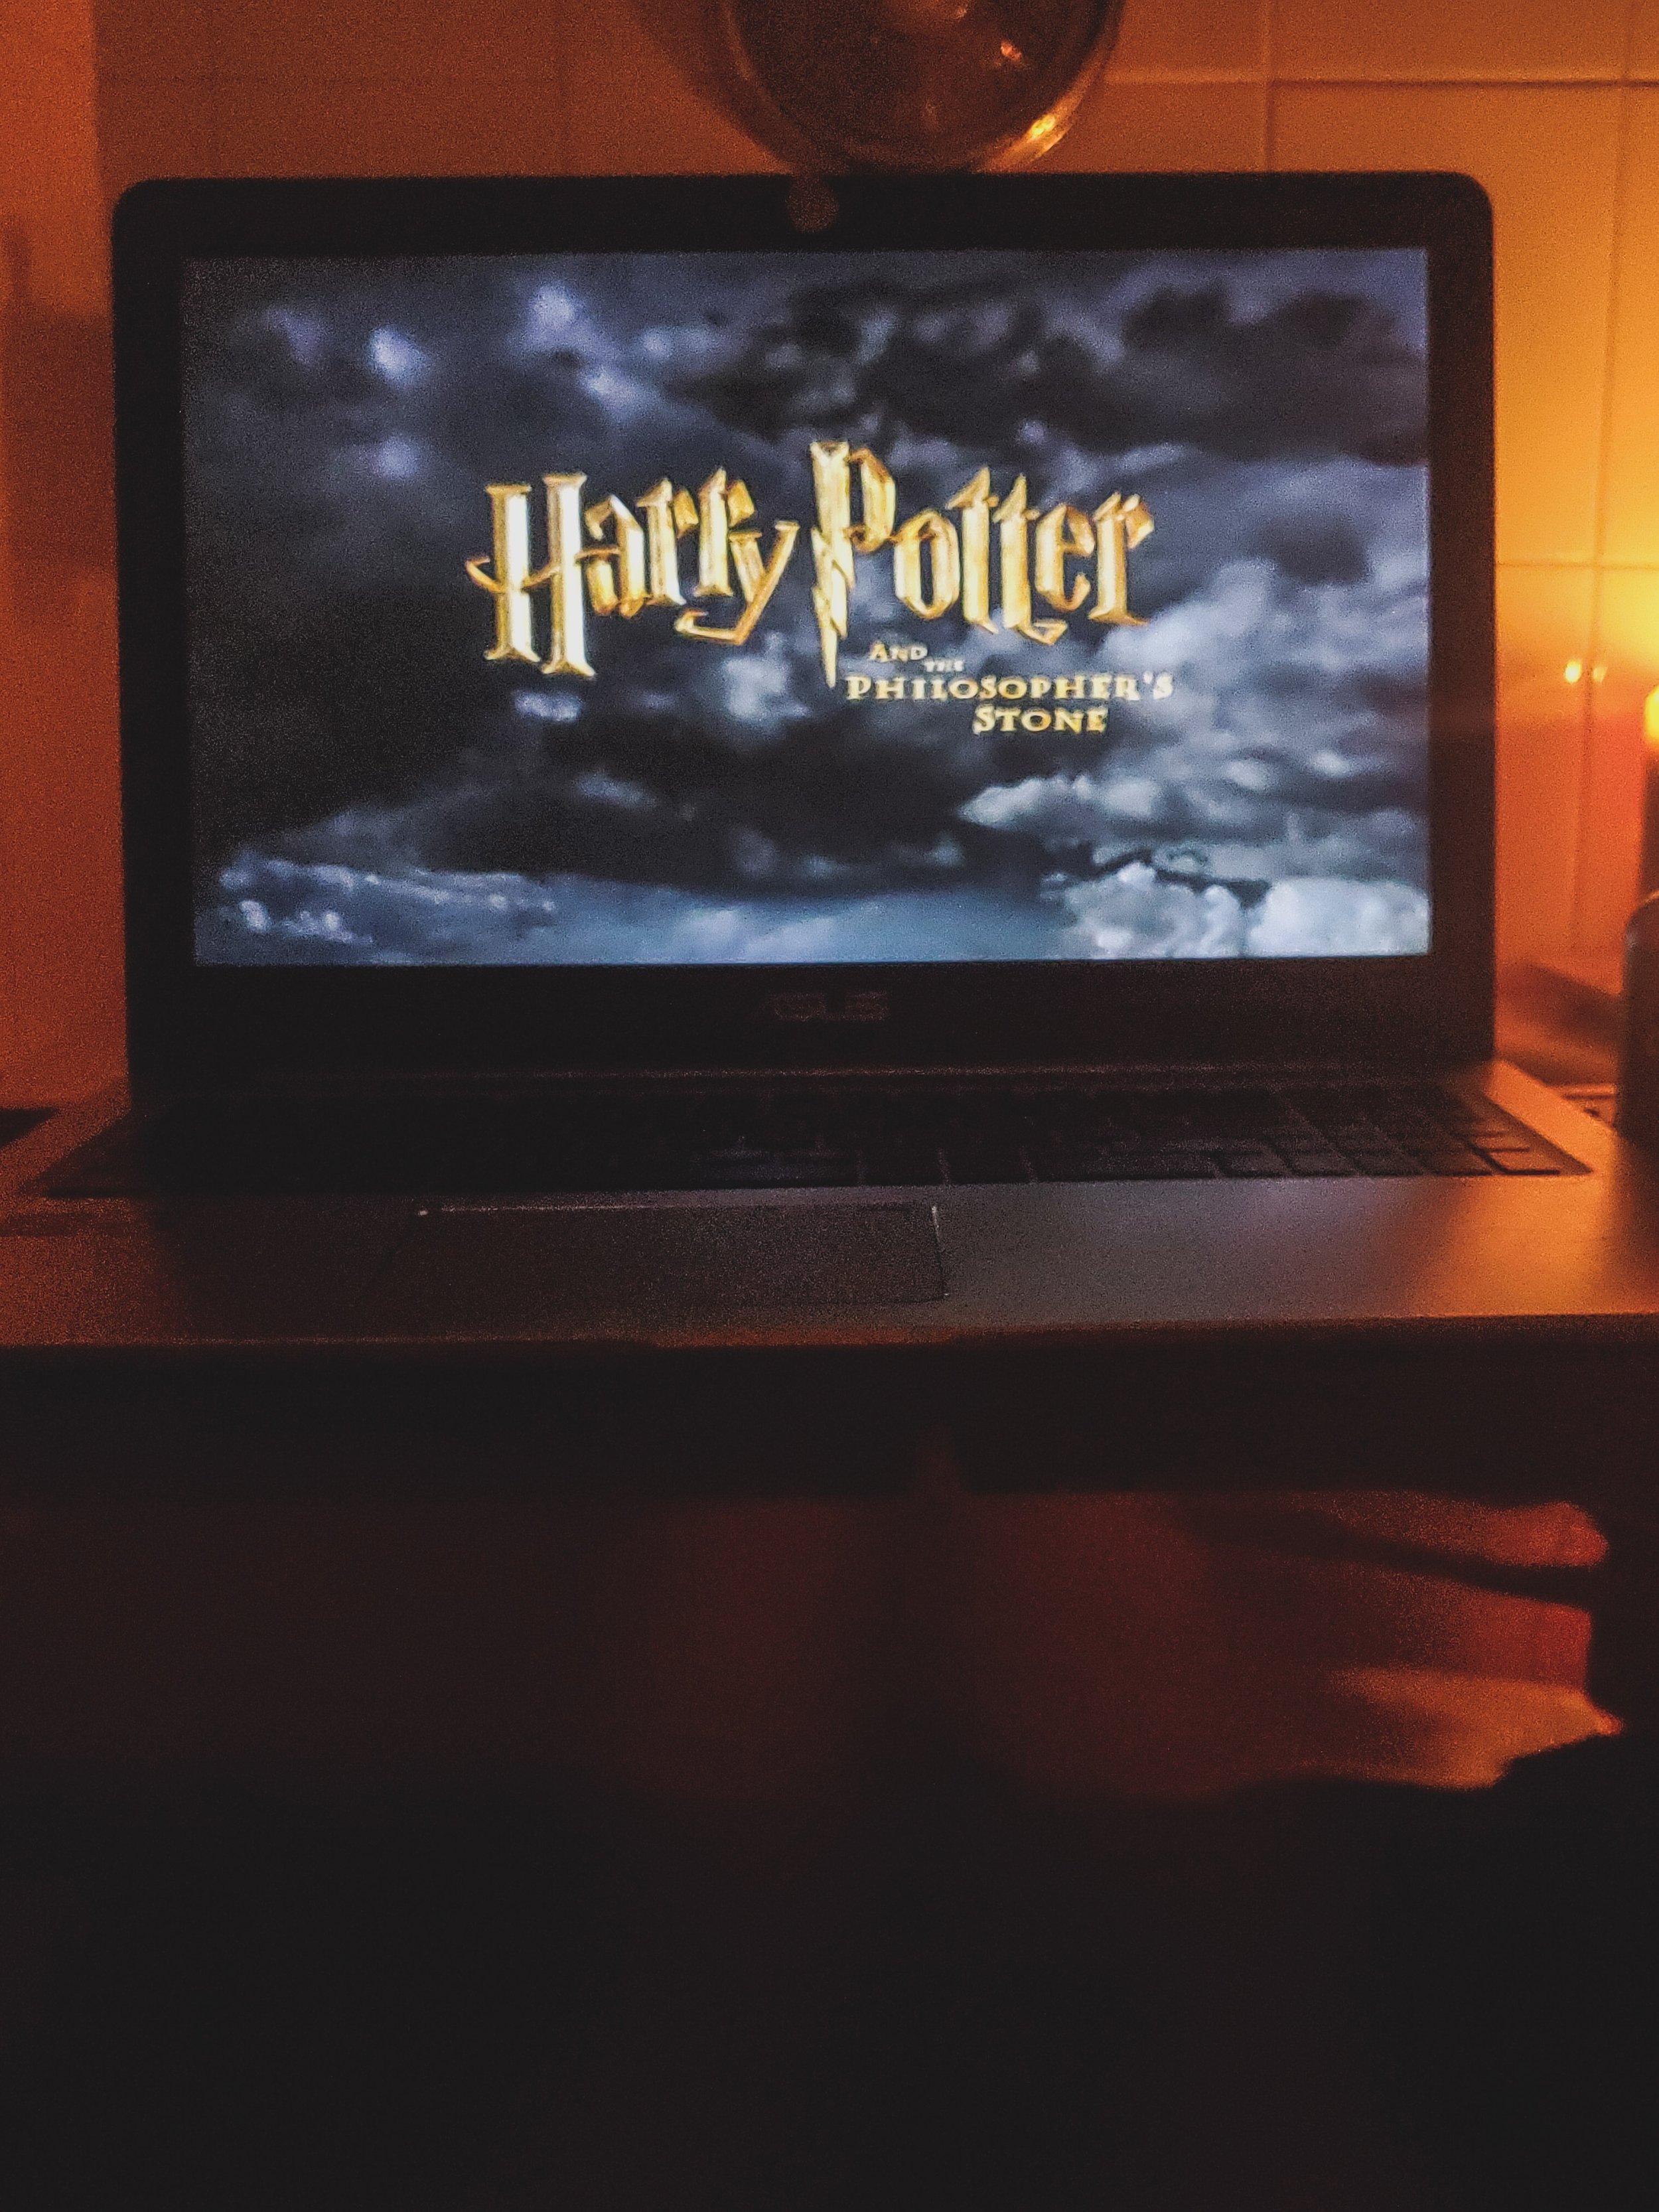  This was just as magical as I remember. It’s been a good several years since I’ve watched these! 